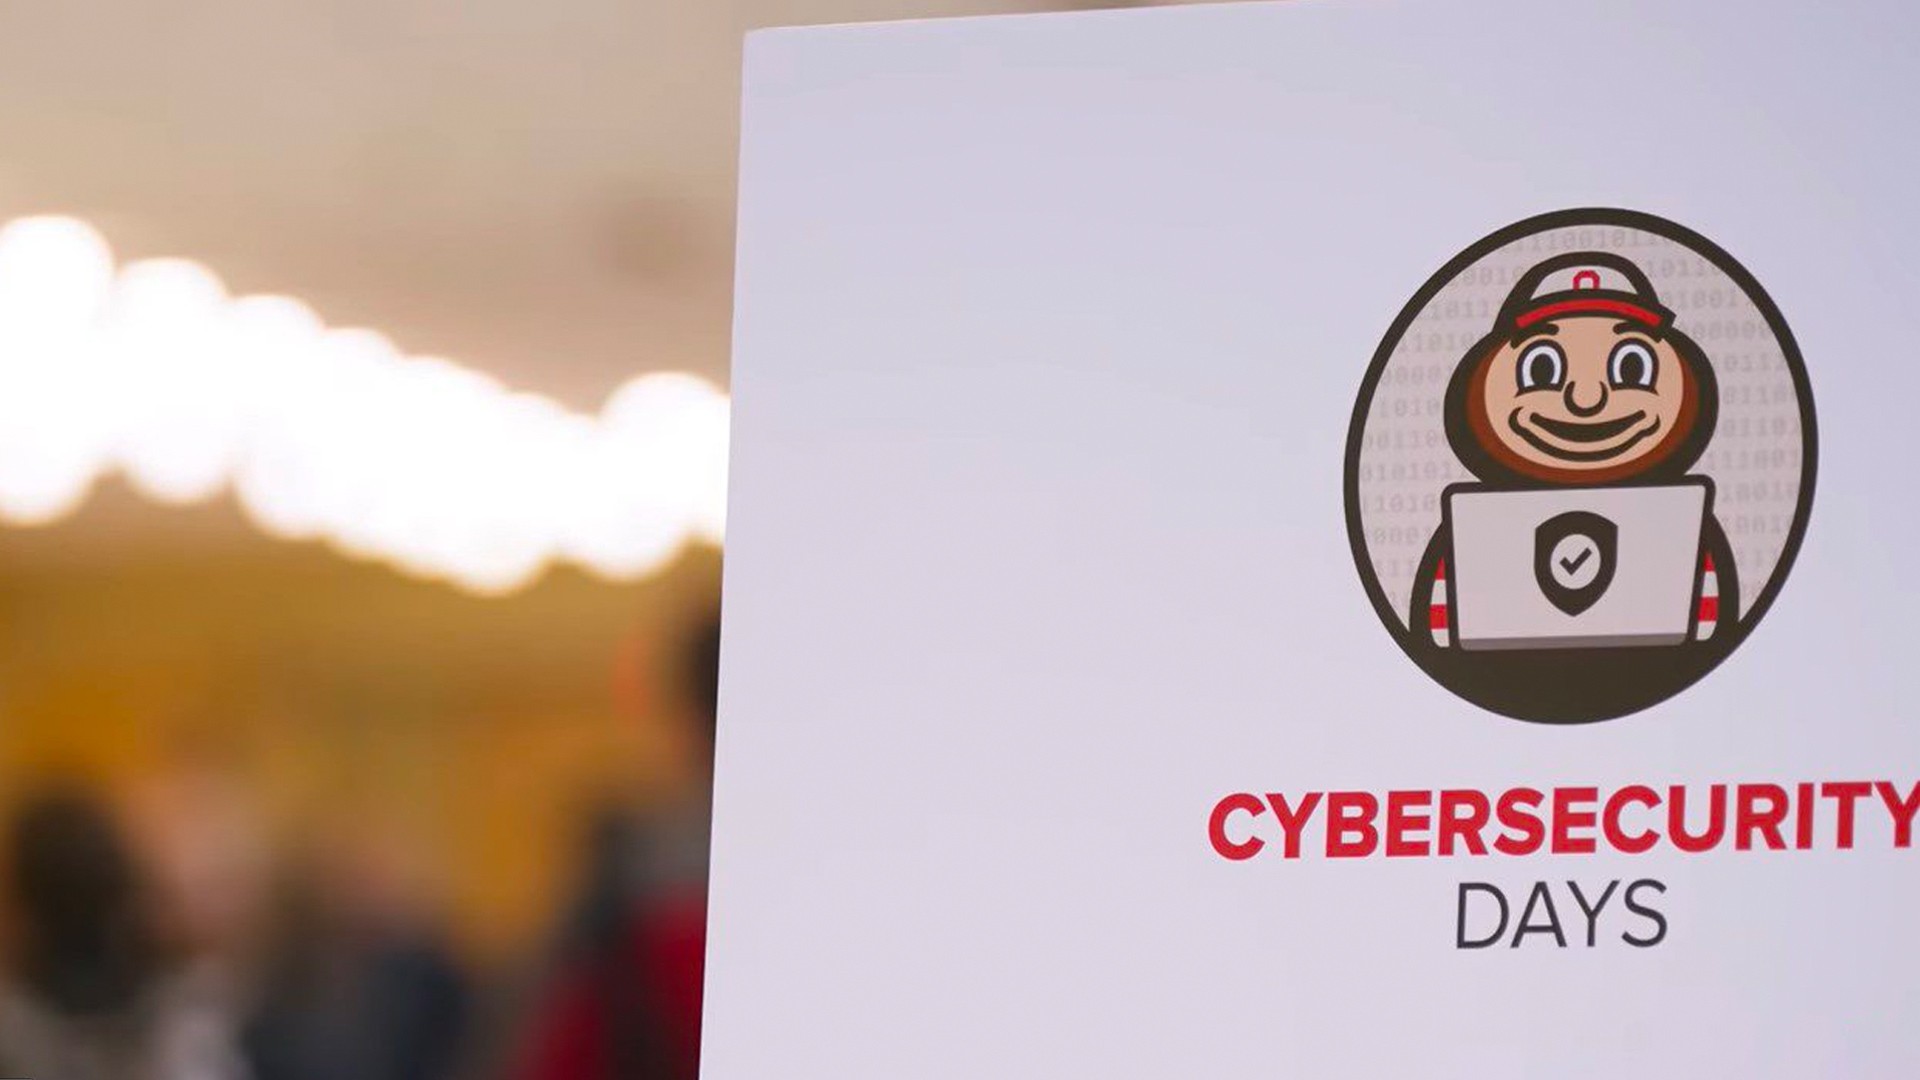 Cybersecurity Days sign displaying the event logo